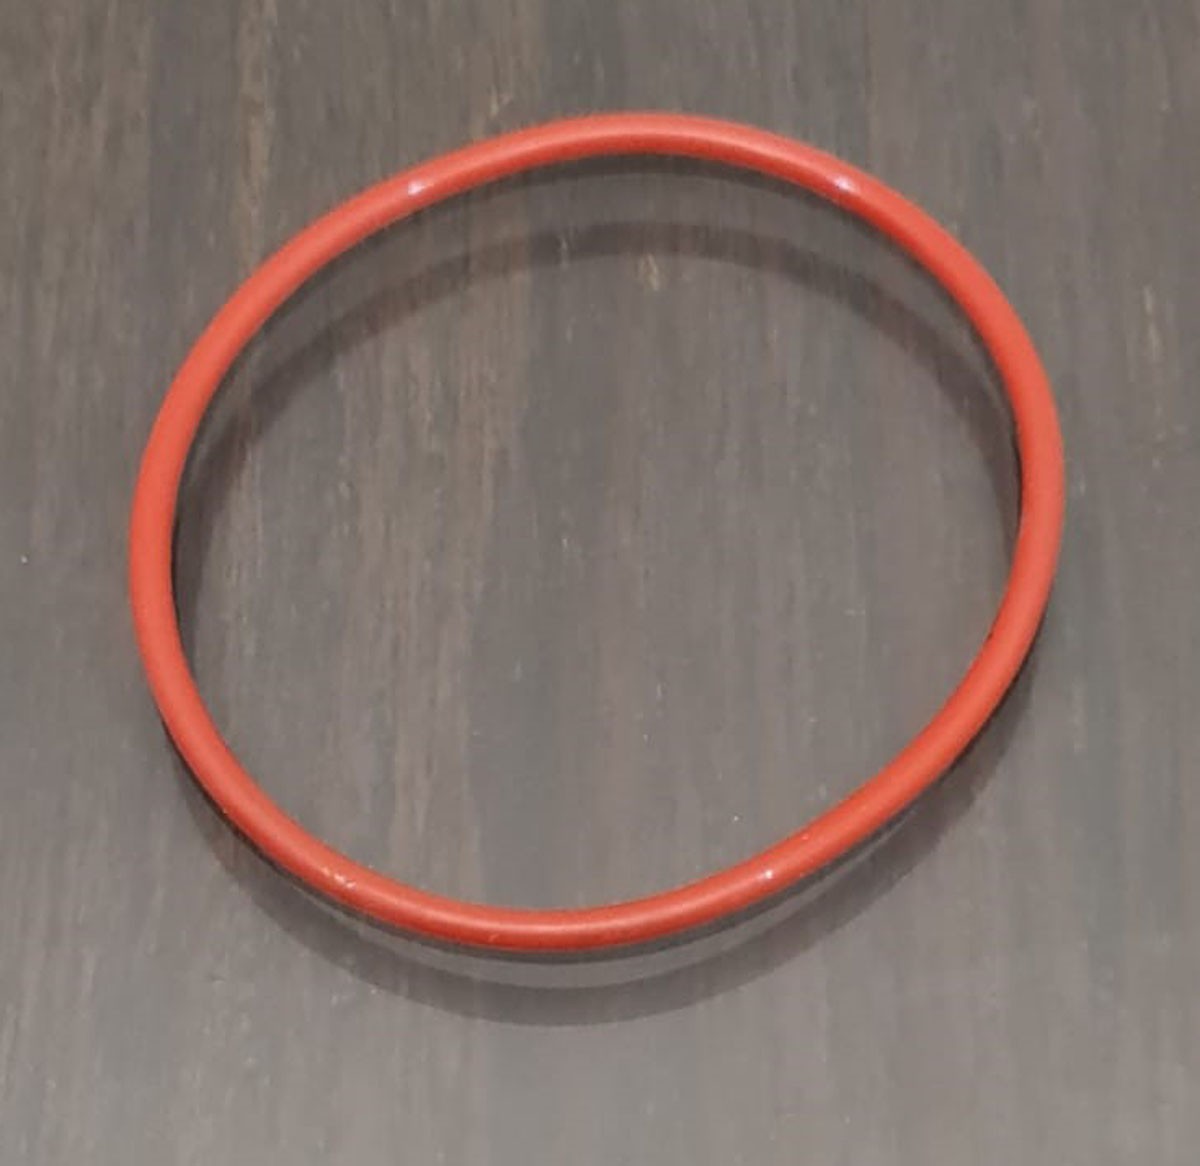 10 Pack of Rubber O-Rings for Pigtails and Extensions - Wired Watts.com